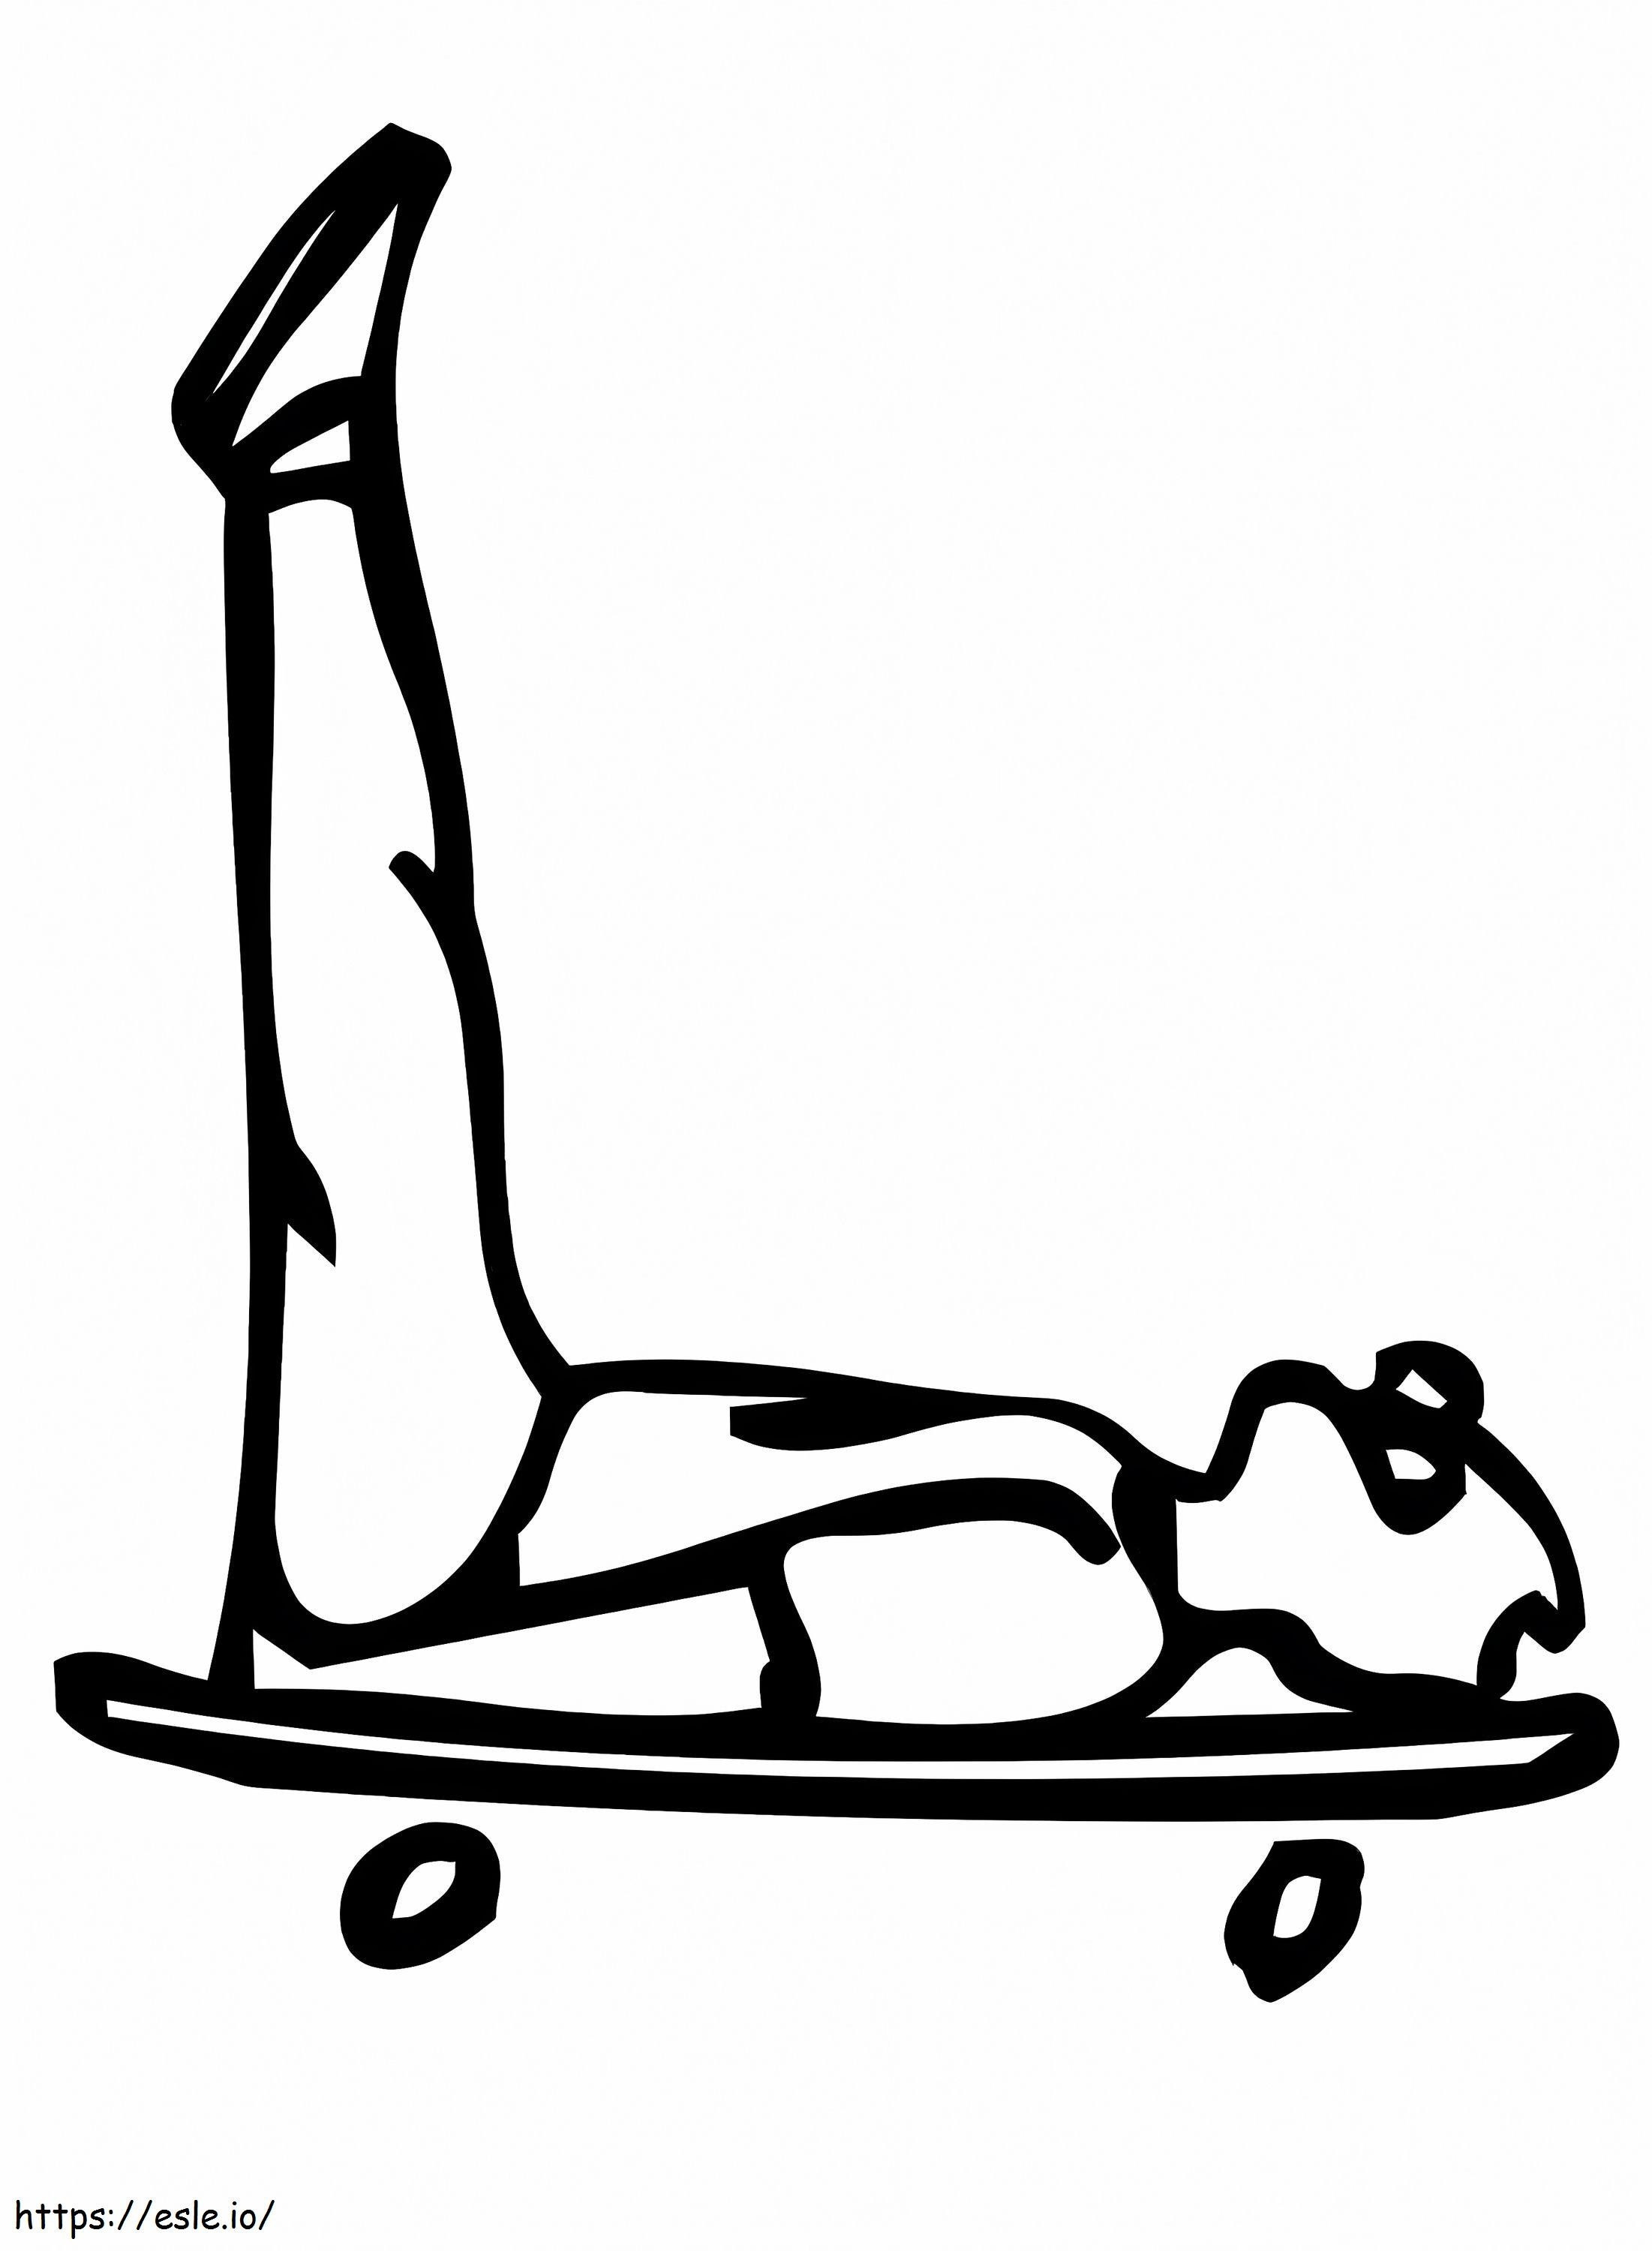 Letter L People On Skateboard coloring page